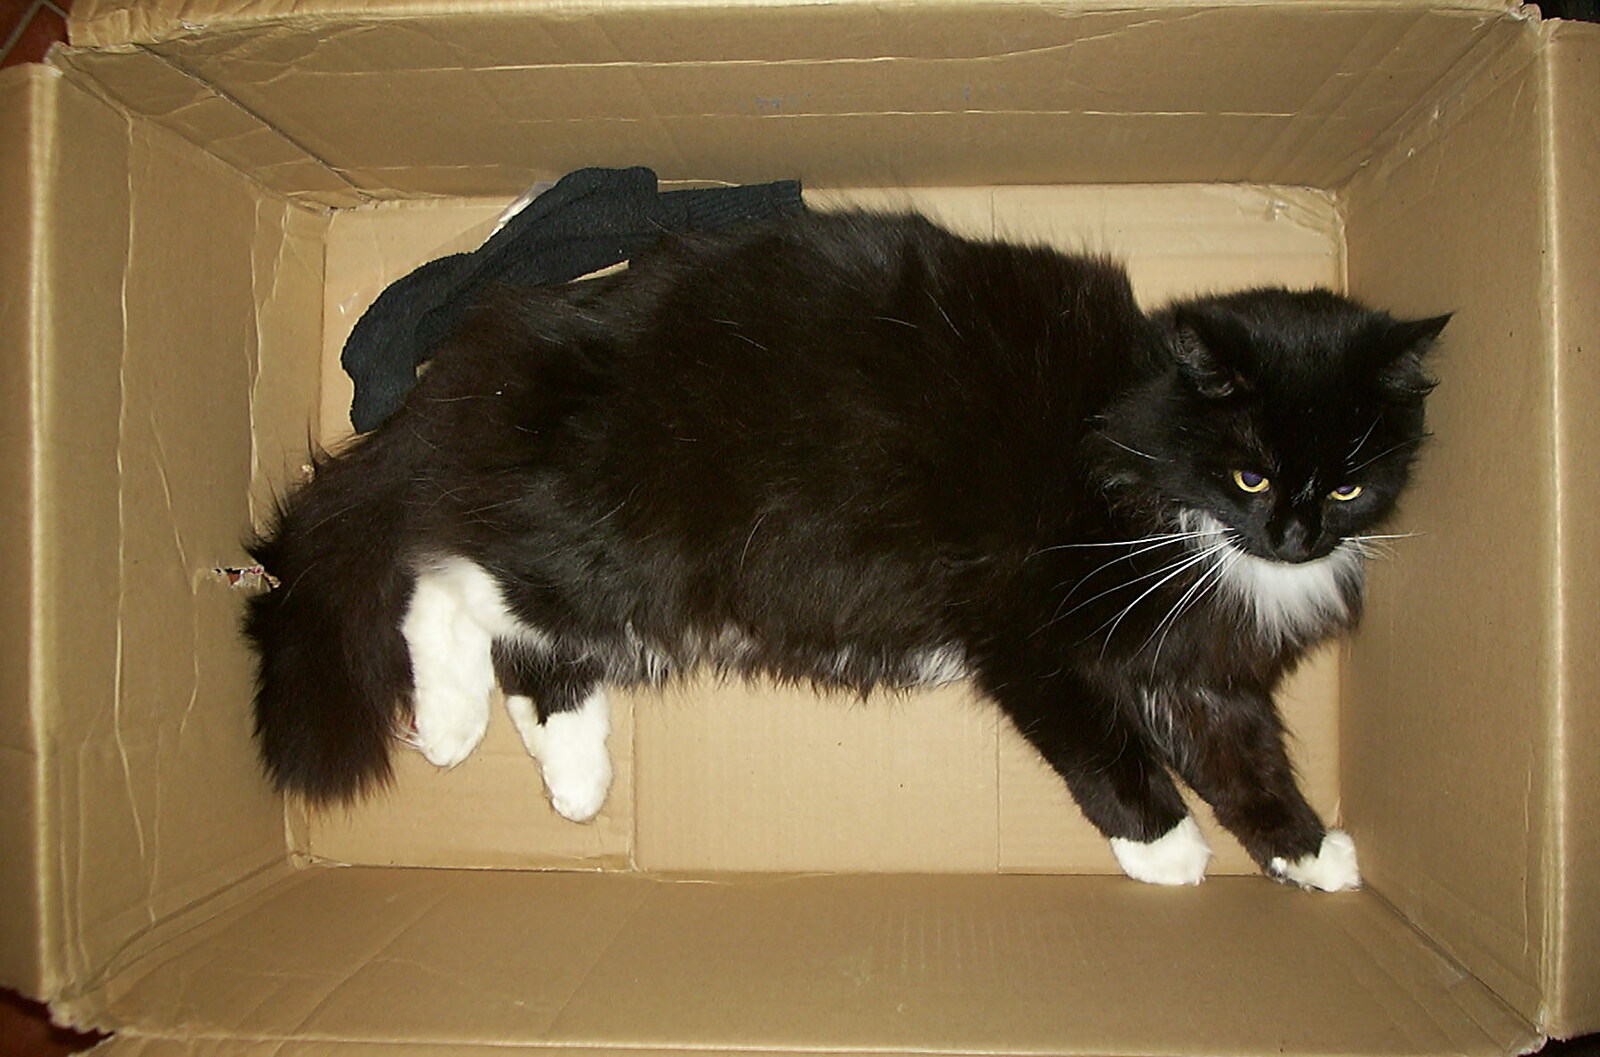 The Sock is in a box from Mother and Mike Visit, and Cat Photos, Brome, Suffolk - 1st September 2002